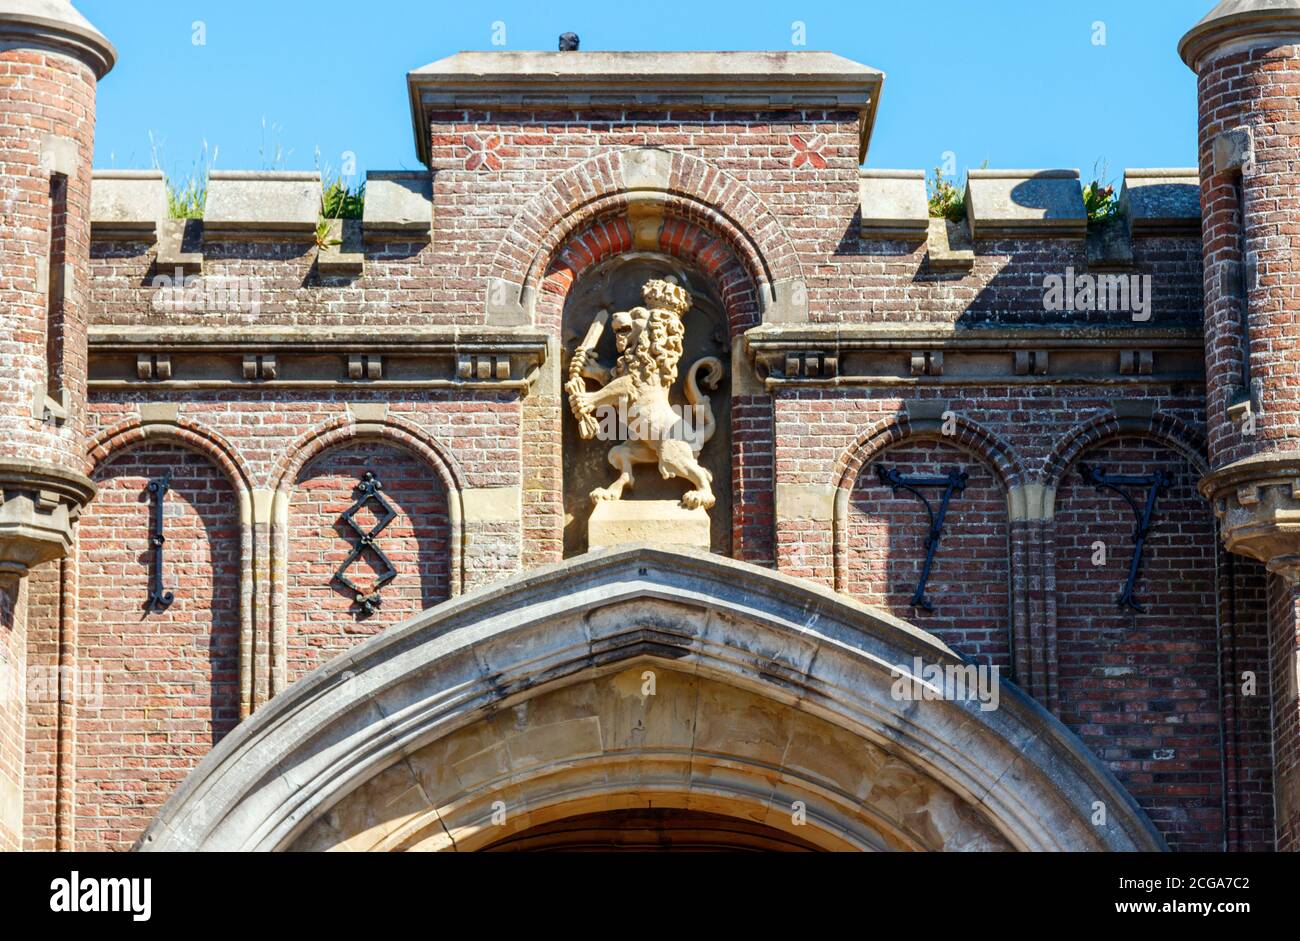 Historic Naarden fortifications. Utrechtse Poort (Utrecht Gate) with the Dutch Republic Lion, the coat of arms of the United provinces. Stock Photo